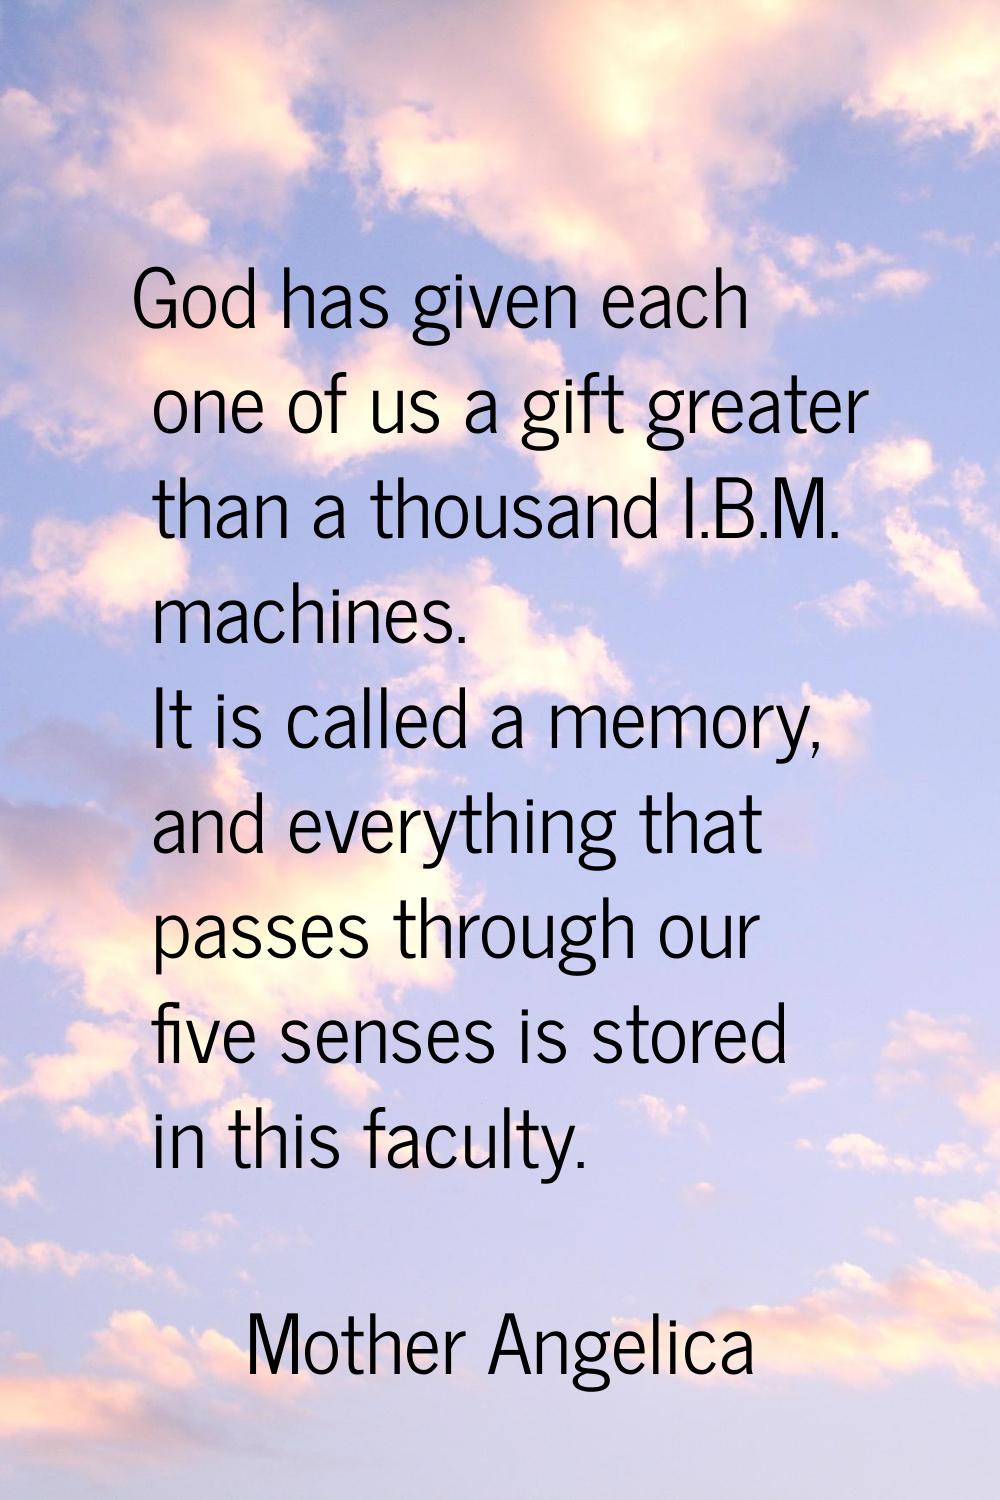 God has given each one of us a gift greater than a thousand I.B.M. machines. It is called a memory,